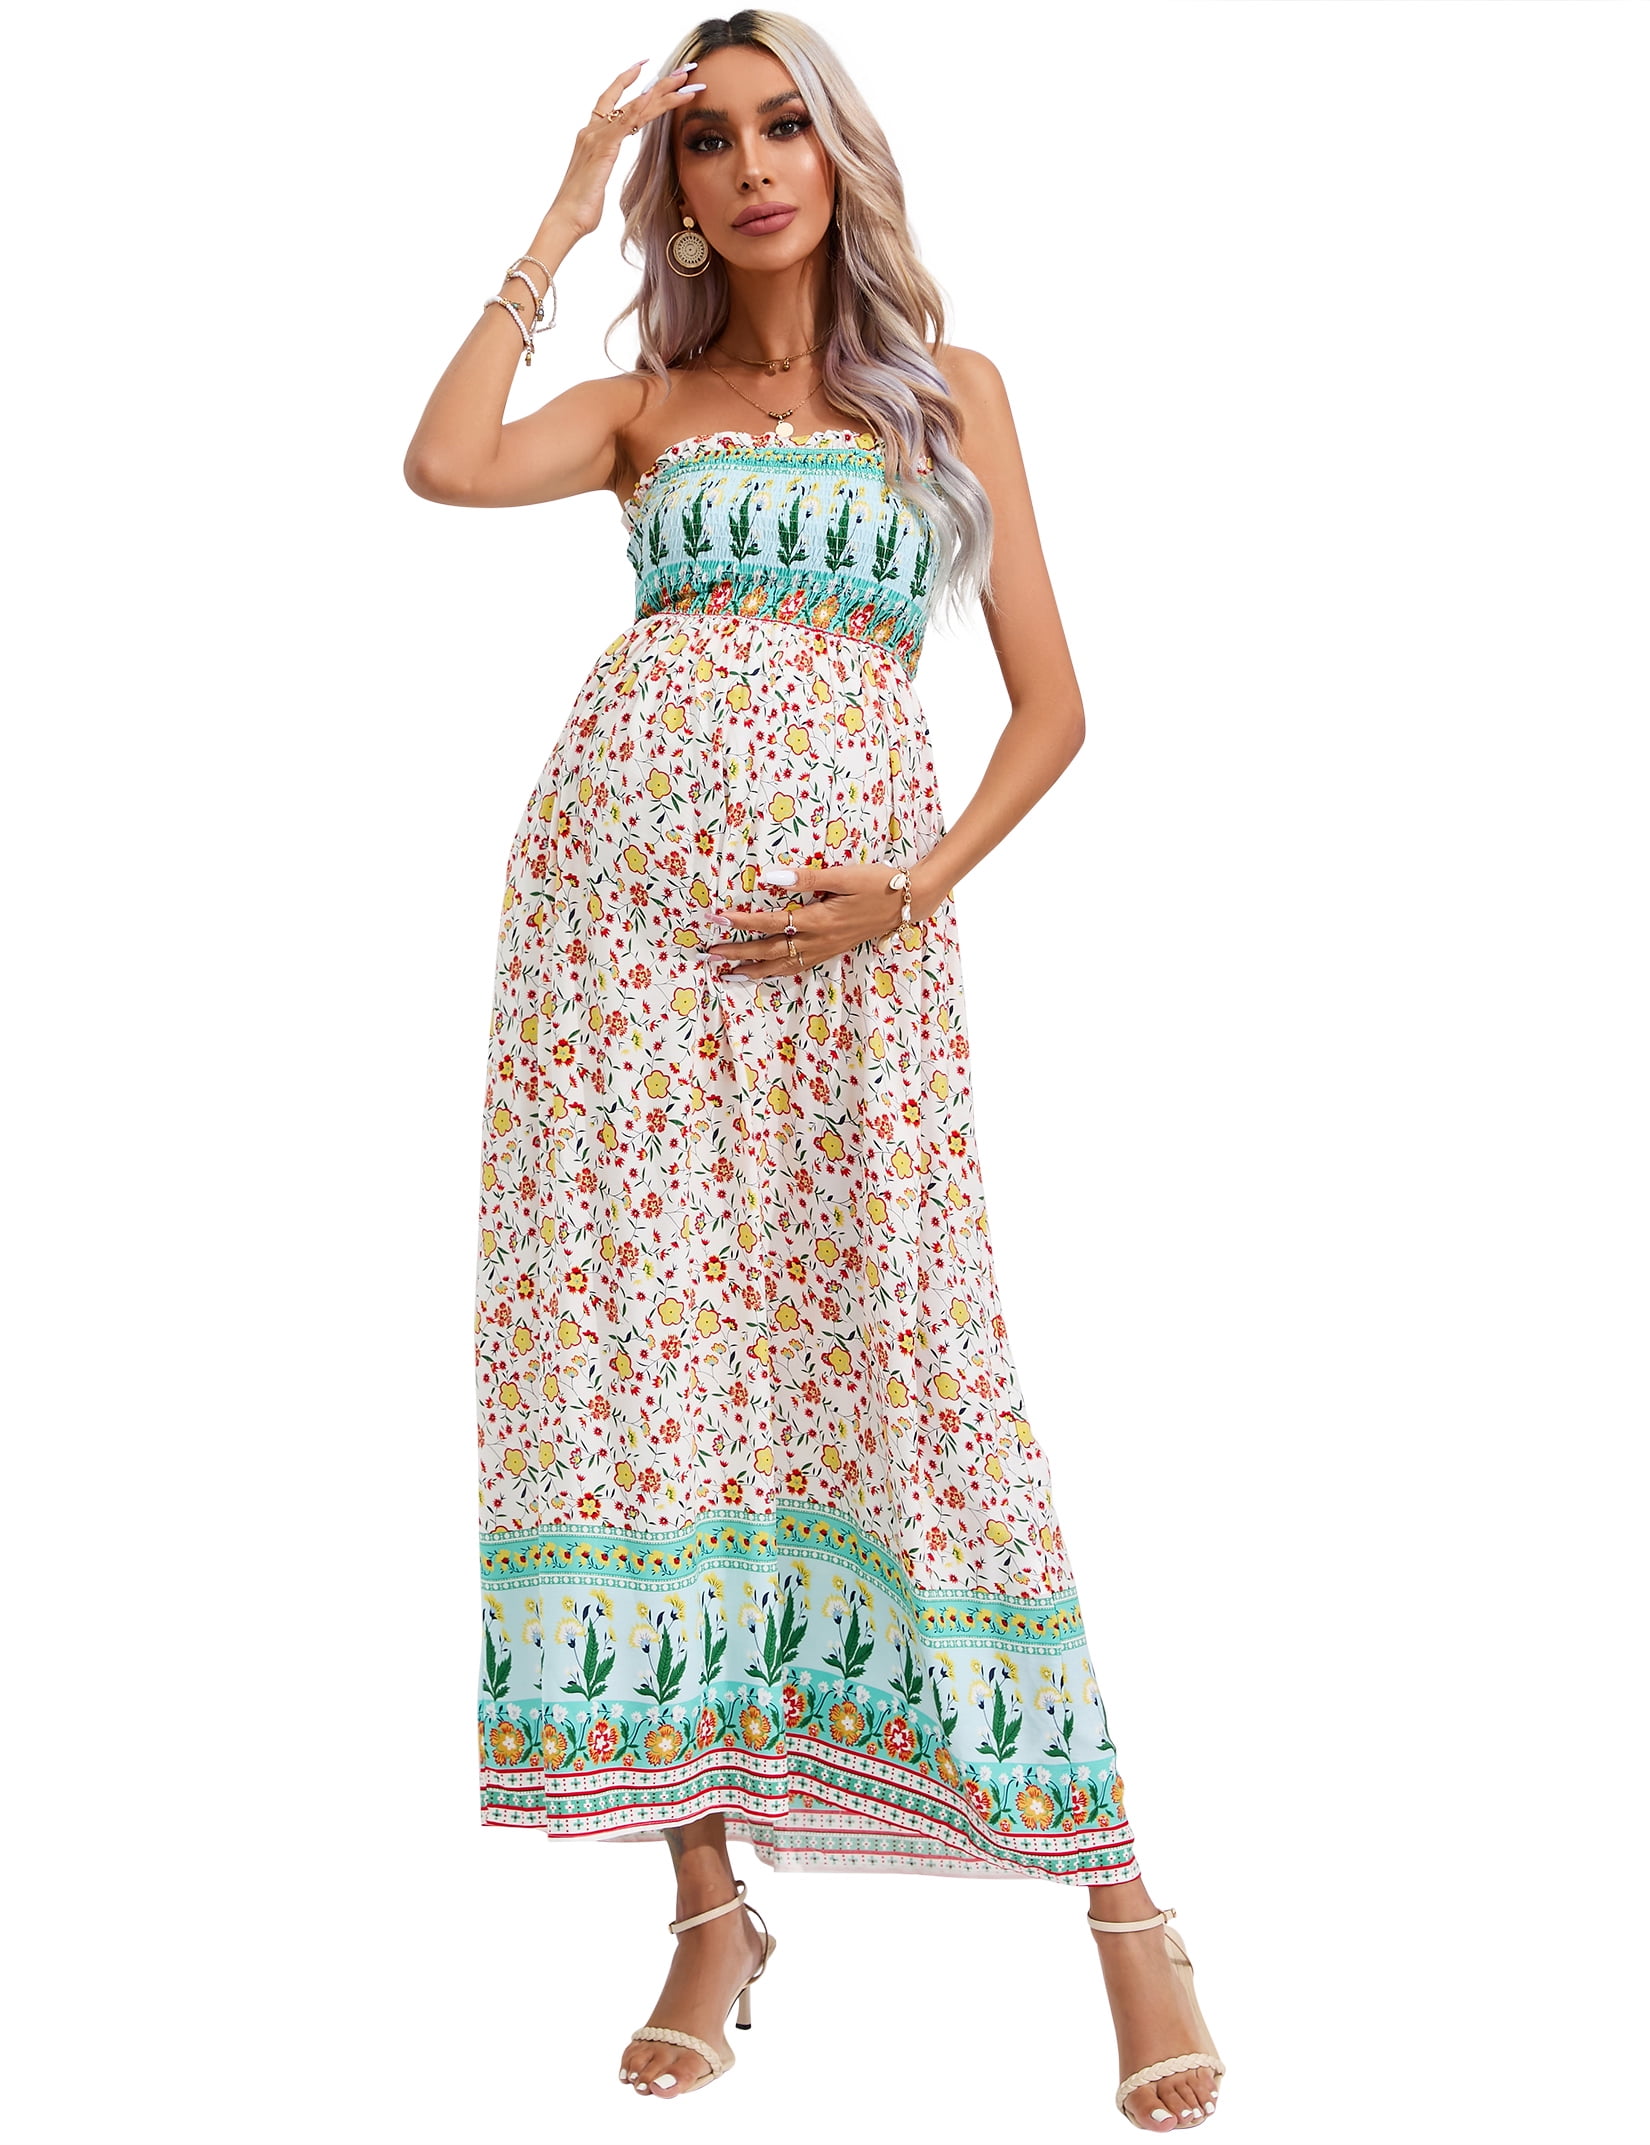 OYang Women's Maternity Dresses Boho Strapless Summer Casual Floral ...